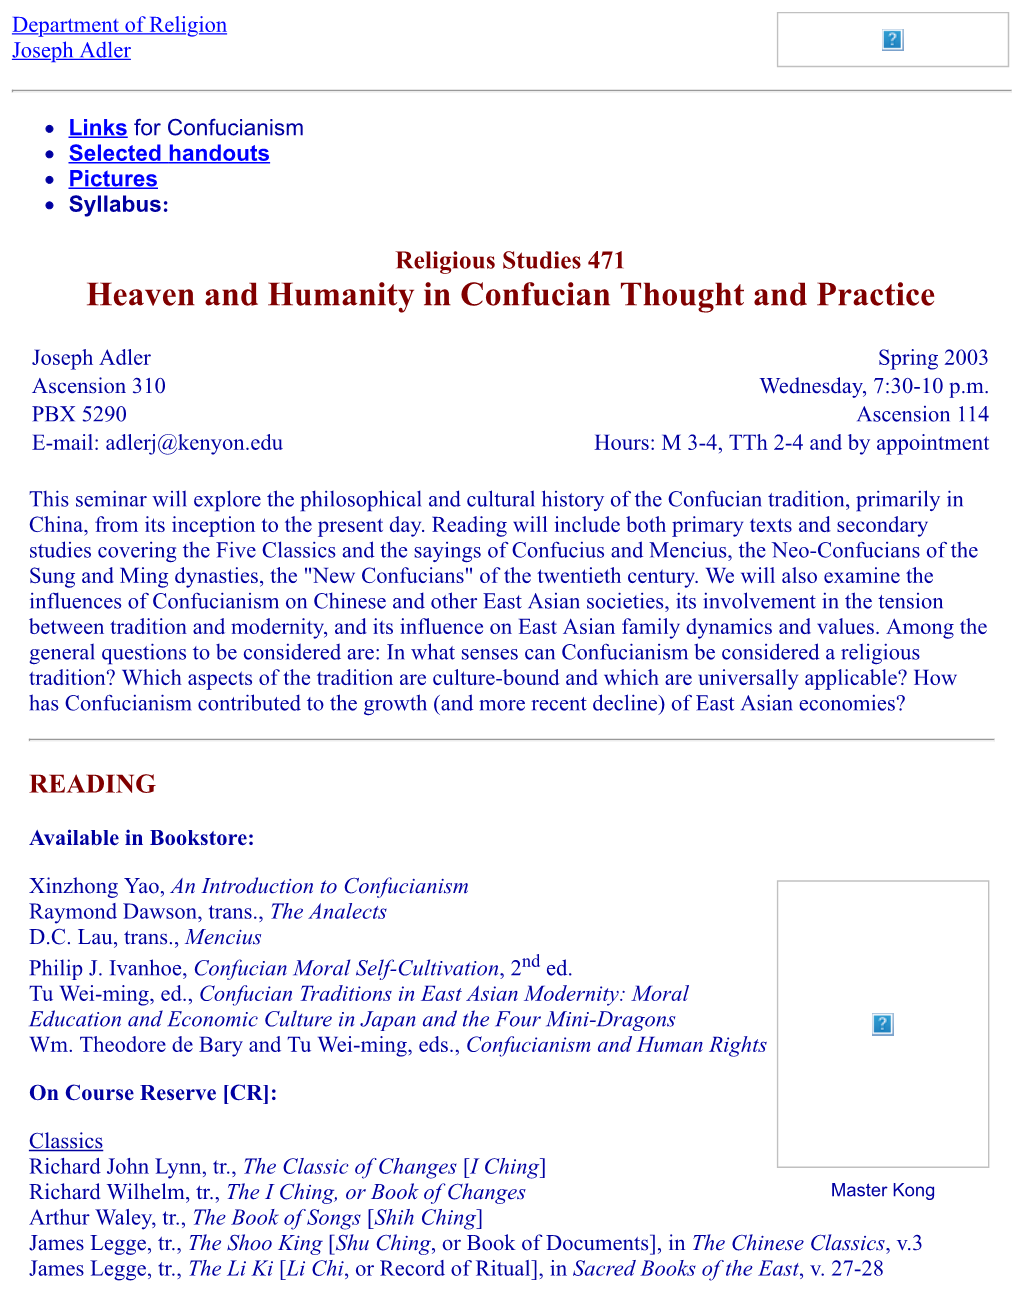 Heaven and Humanity in Confucian Thought and Practice